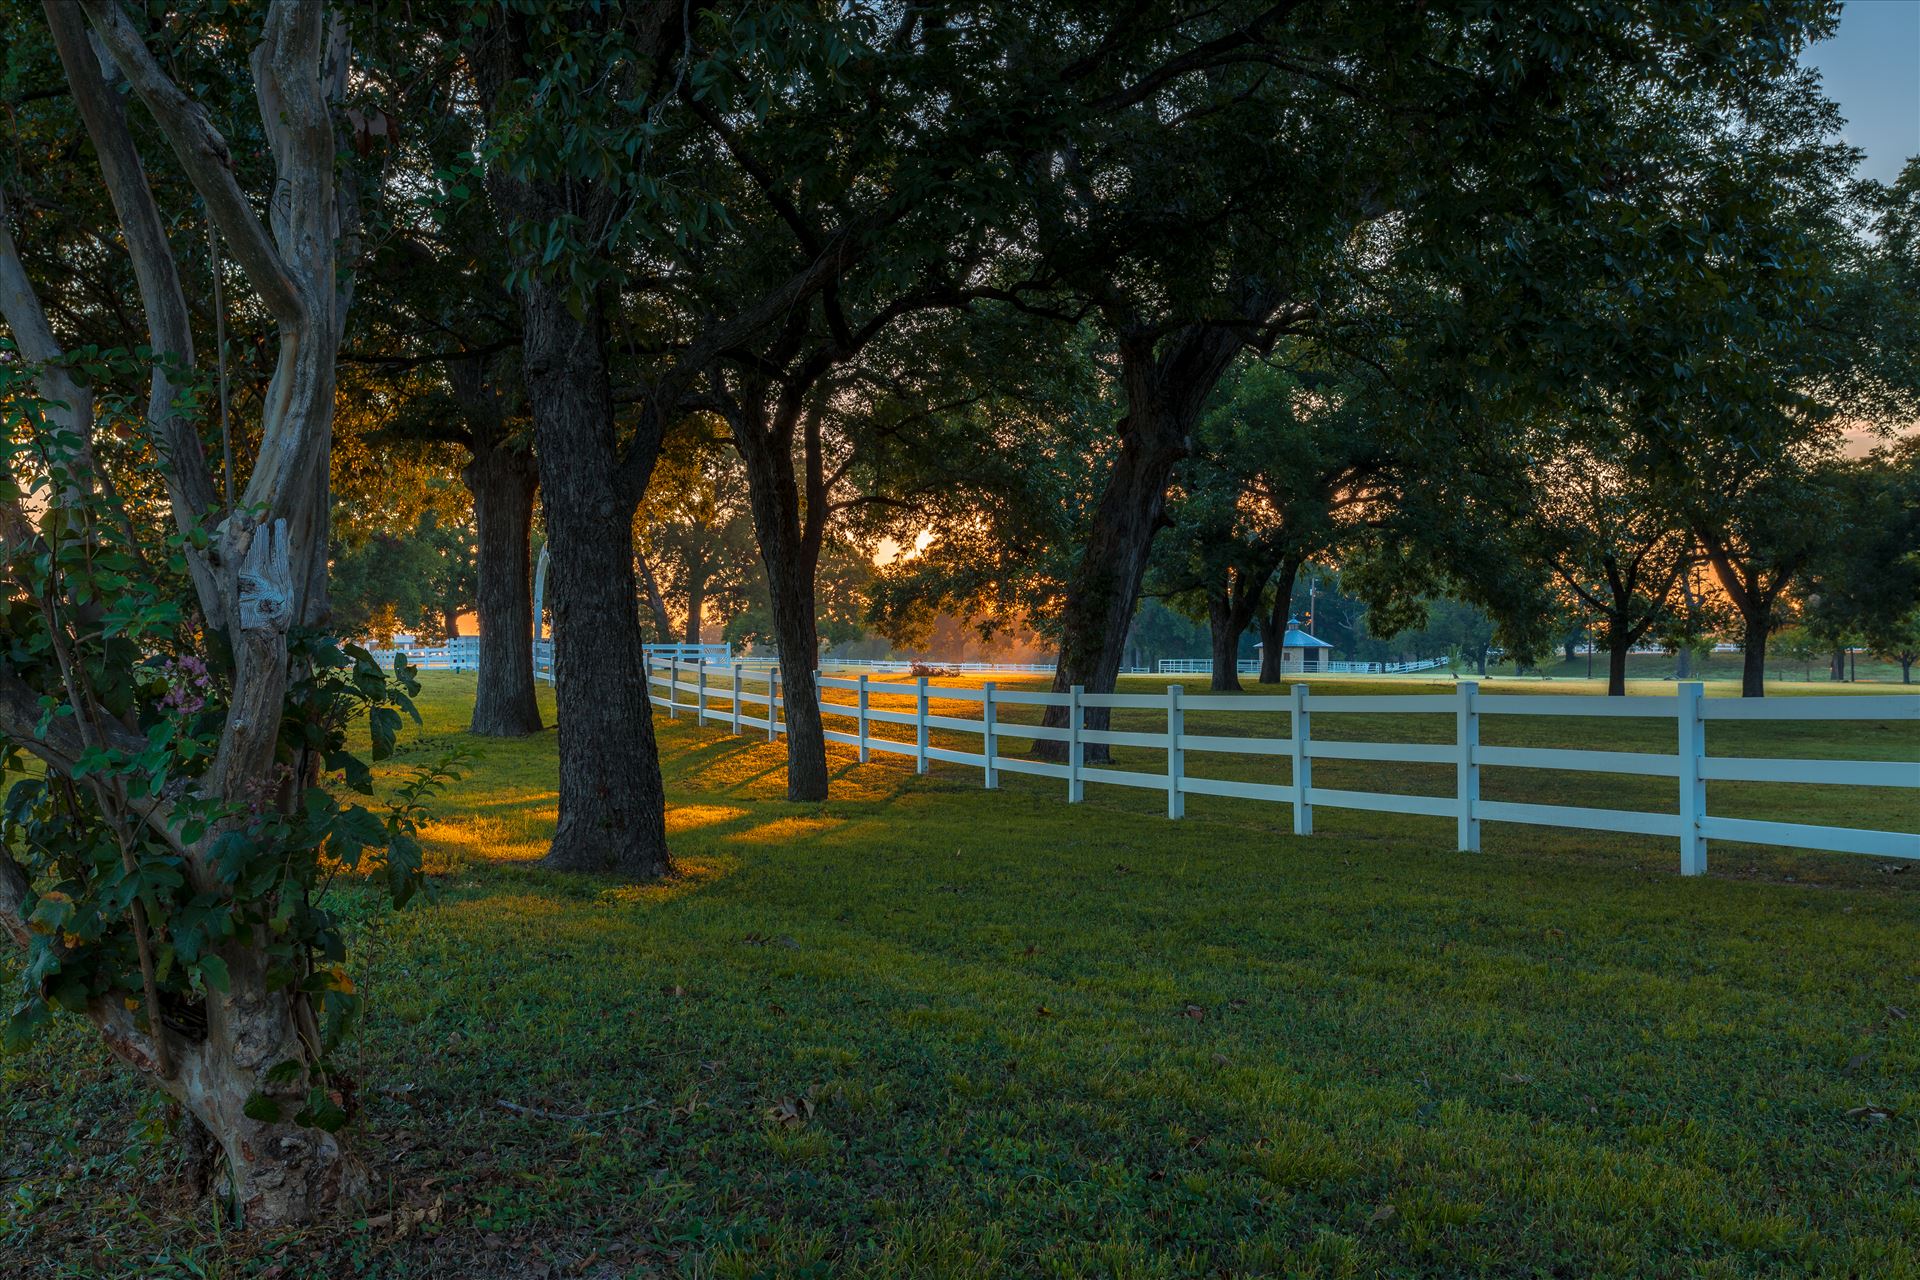 20171001_White Fence_027-HDR.jpg  by Charles Smith Photography